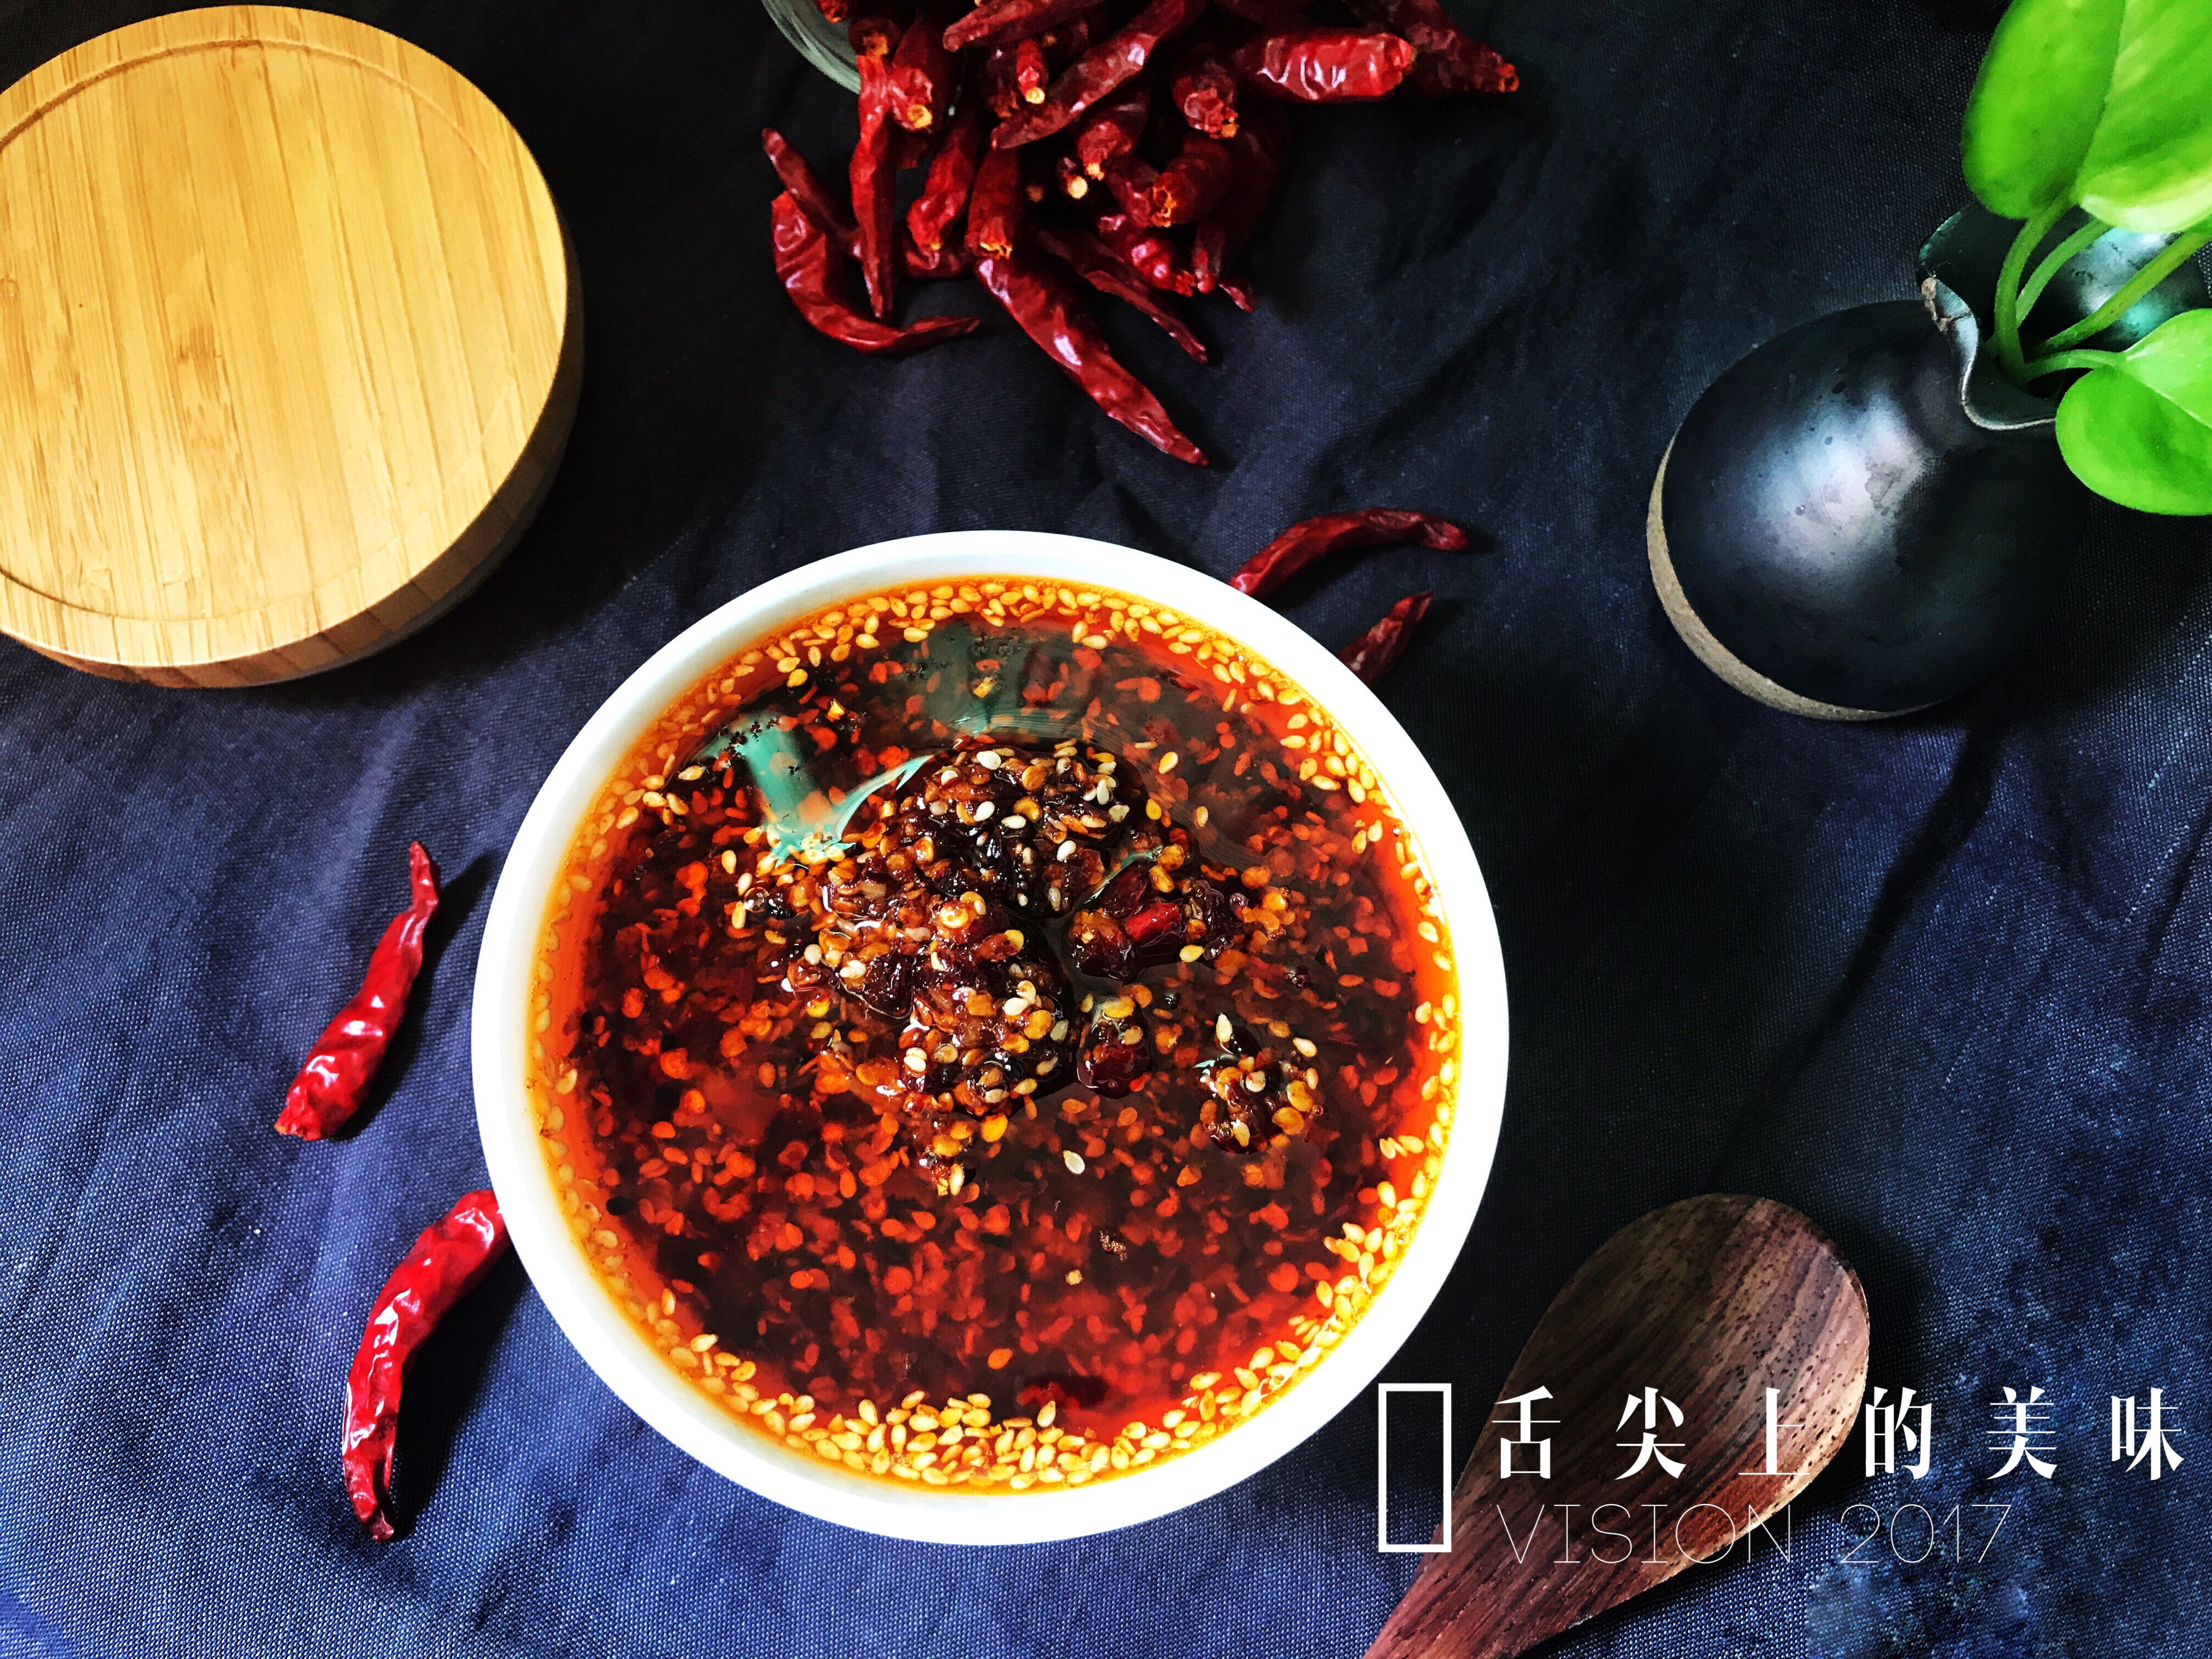 
Chili oil- - the practice with delicate habit-forming